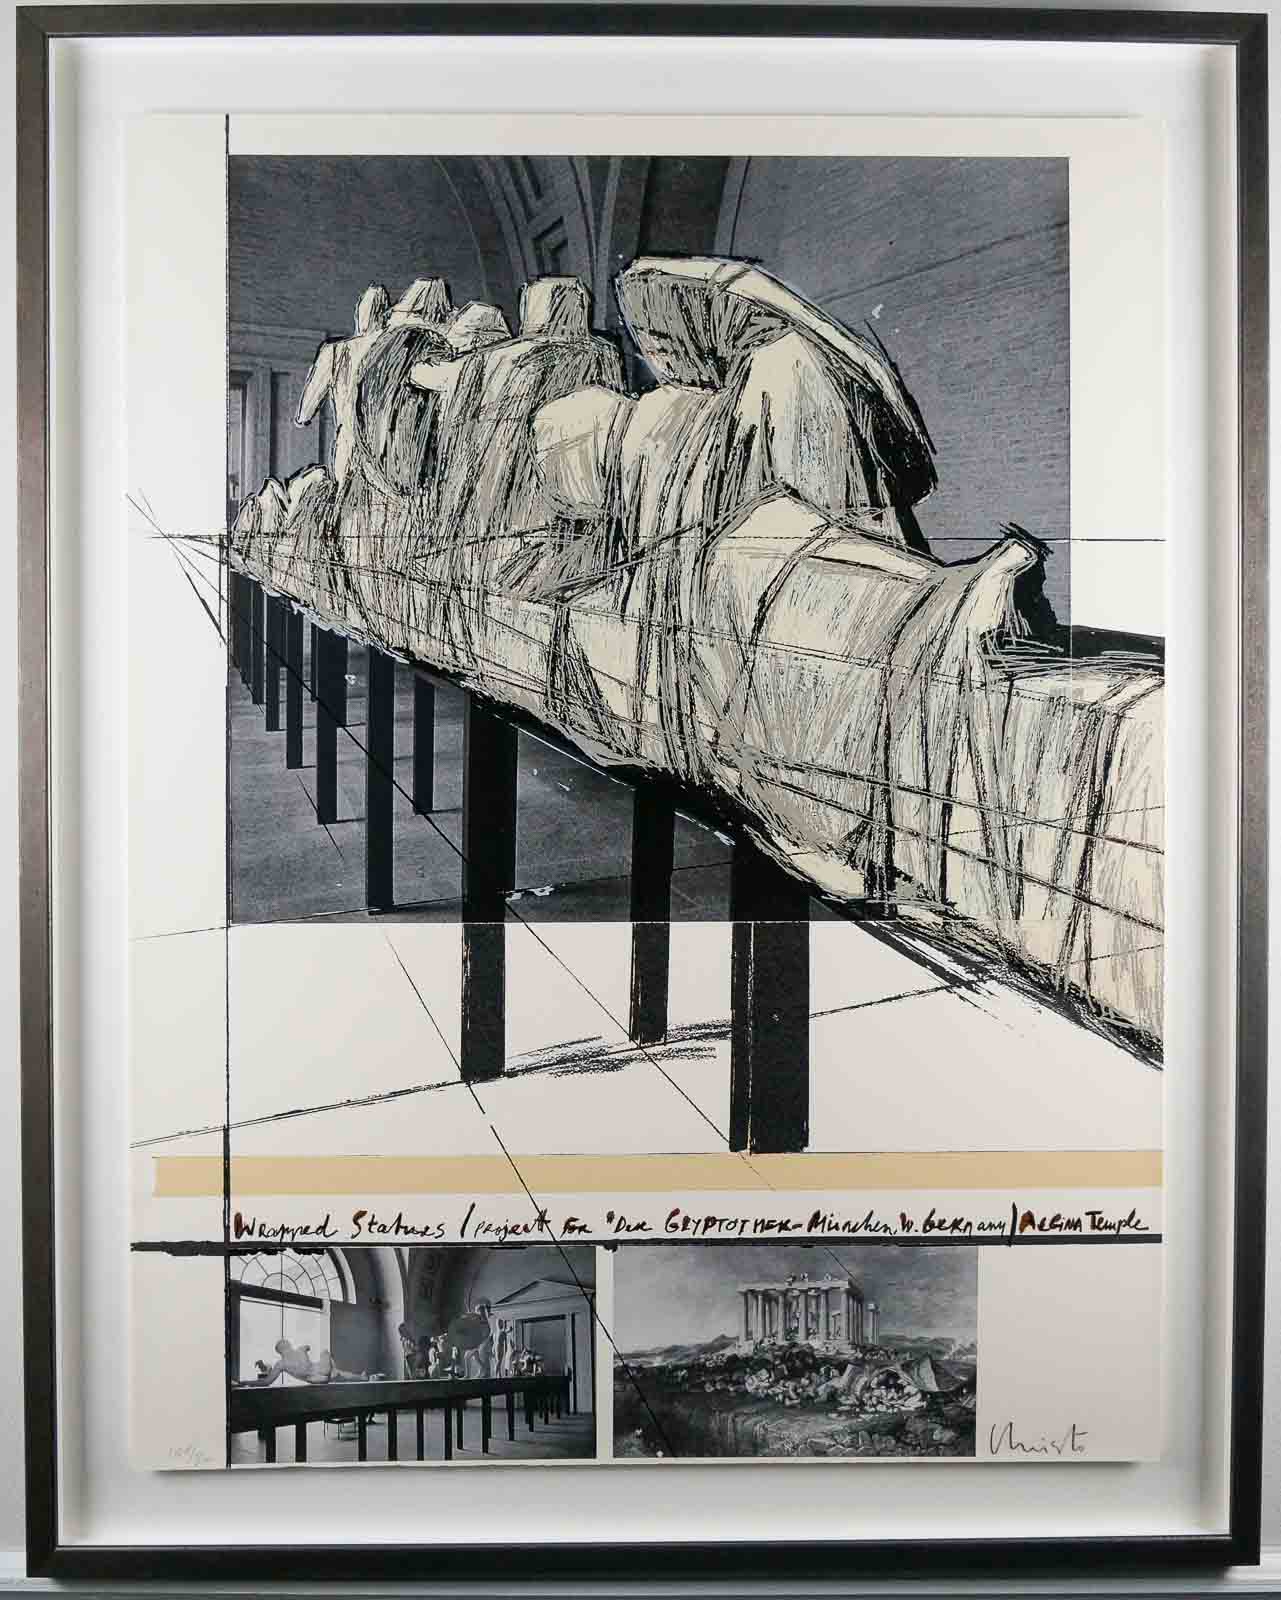 Christo and Jeanne-Claude Wrapped Statues Aegina Temple, 1988